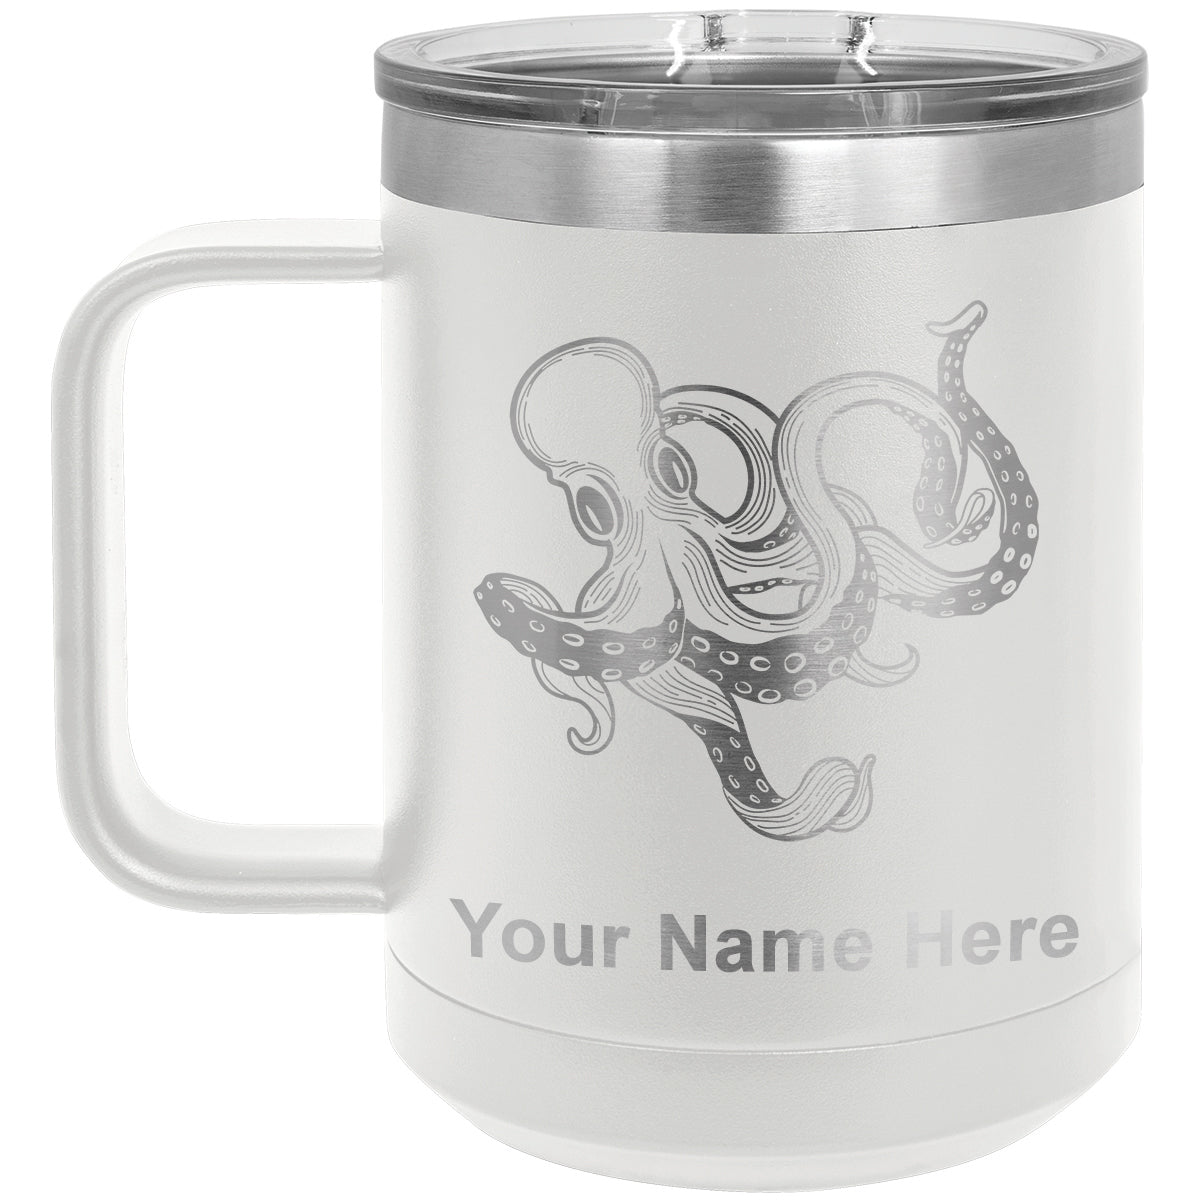 15oz Vacuum Insulated Coffee Mug, Kraken, Personalized Engraving Included